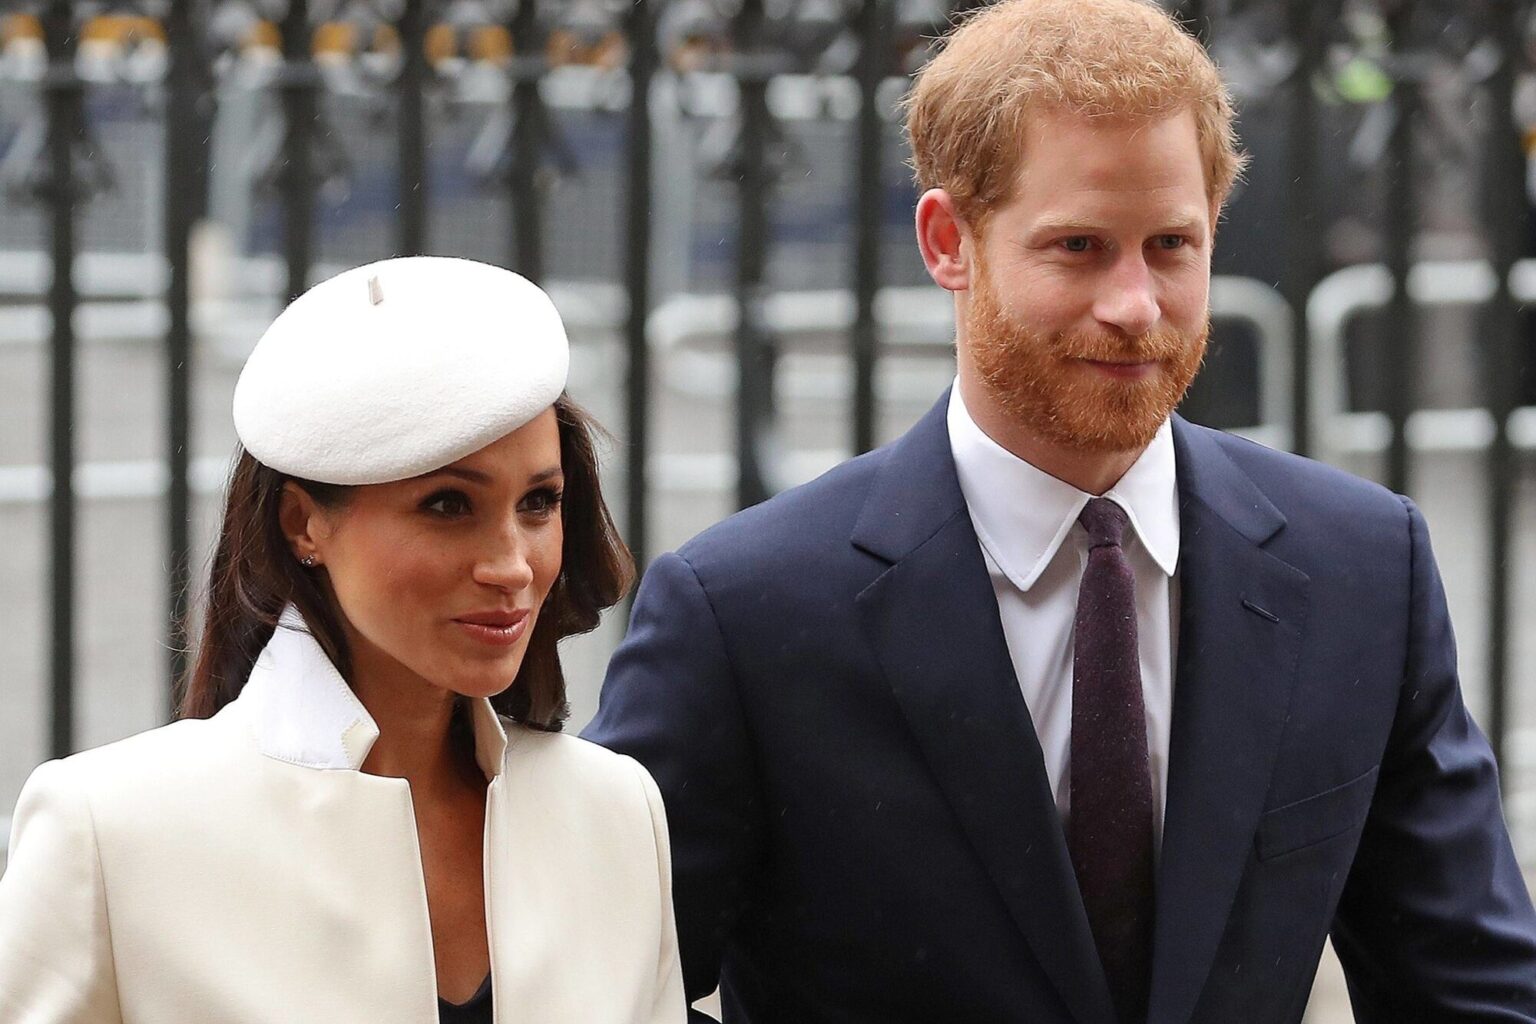 Prince Harry and Prince William are invited to Prince Philip's funeral. But will Meghan Markle attend? Find out if Harry will arrive in the UK alone.